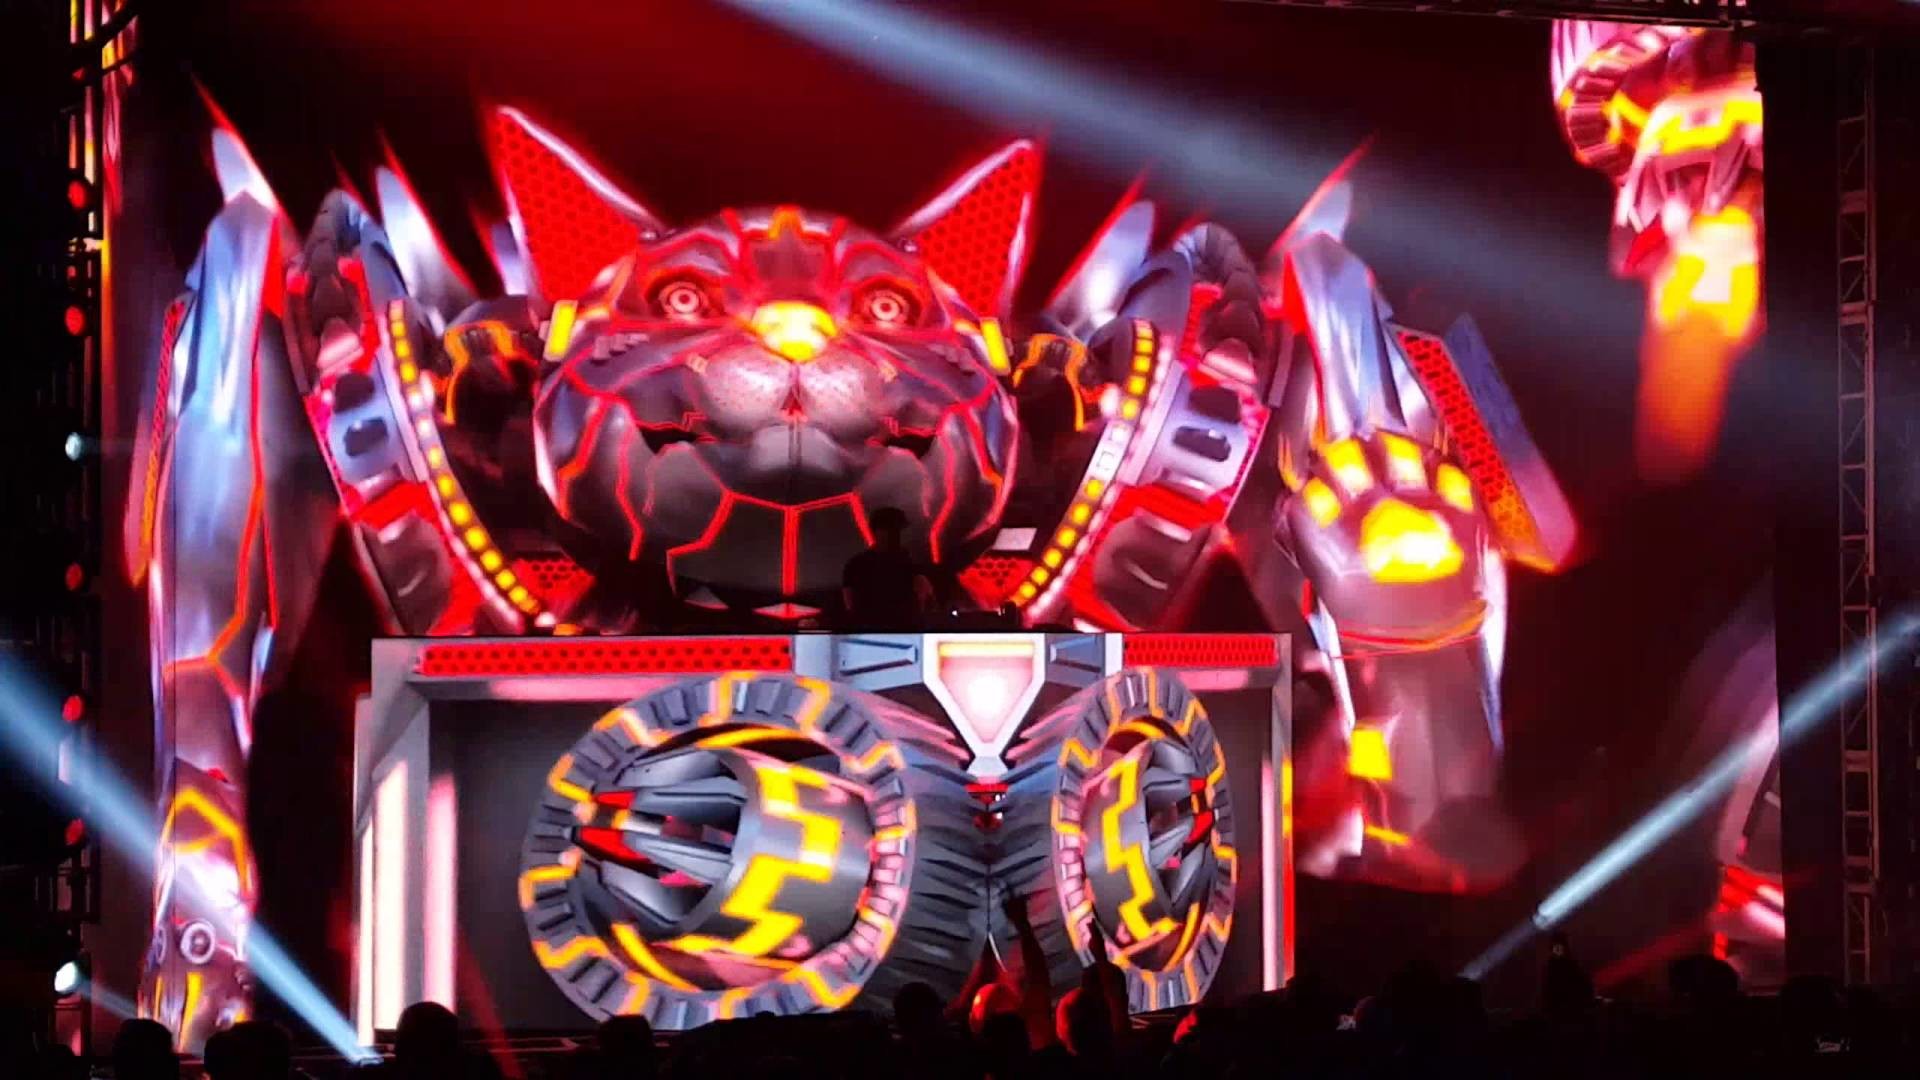 1920x1080 Excision - robo kitty live in Detroit with the paradox 3/13/2016